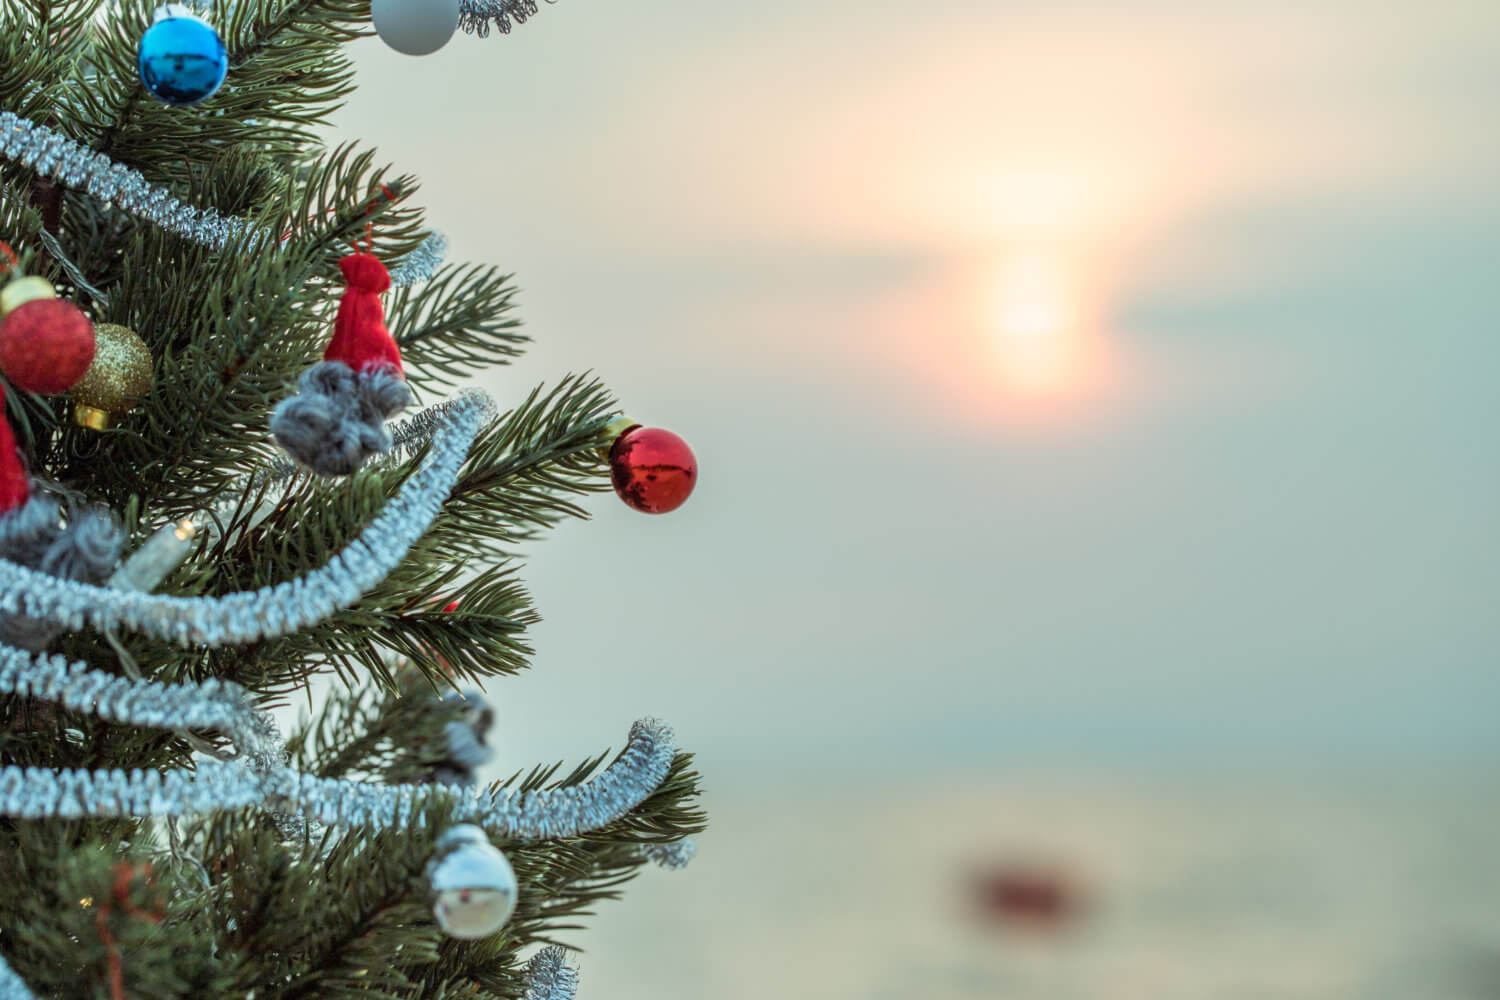 7 things foreigners love about Christmas in Turkey